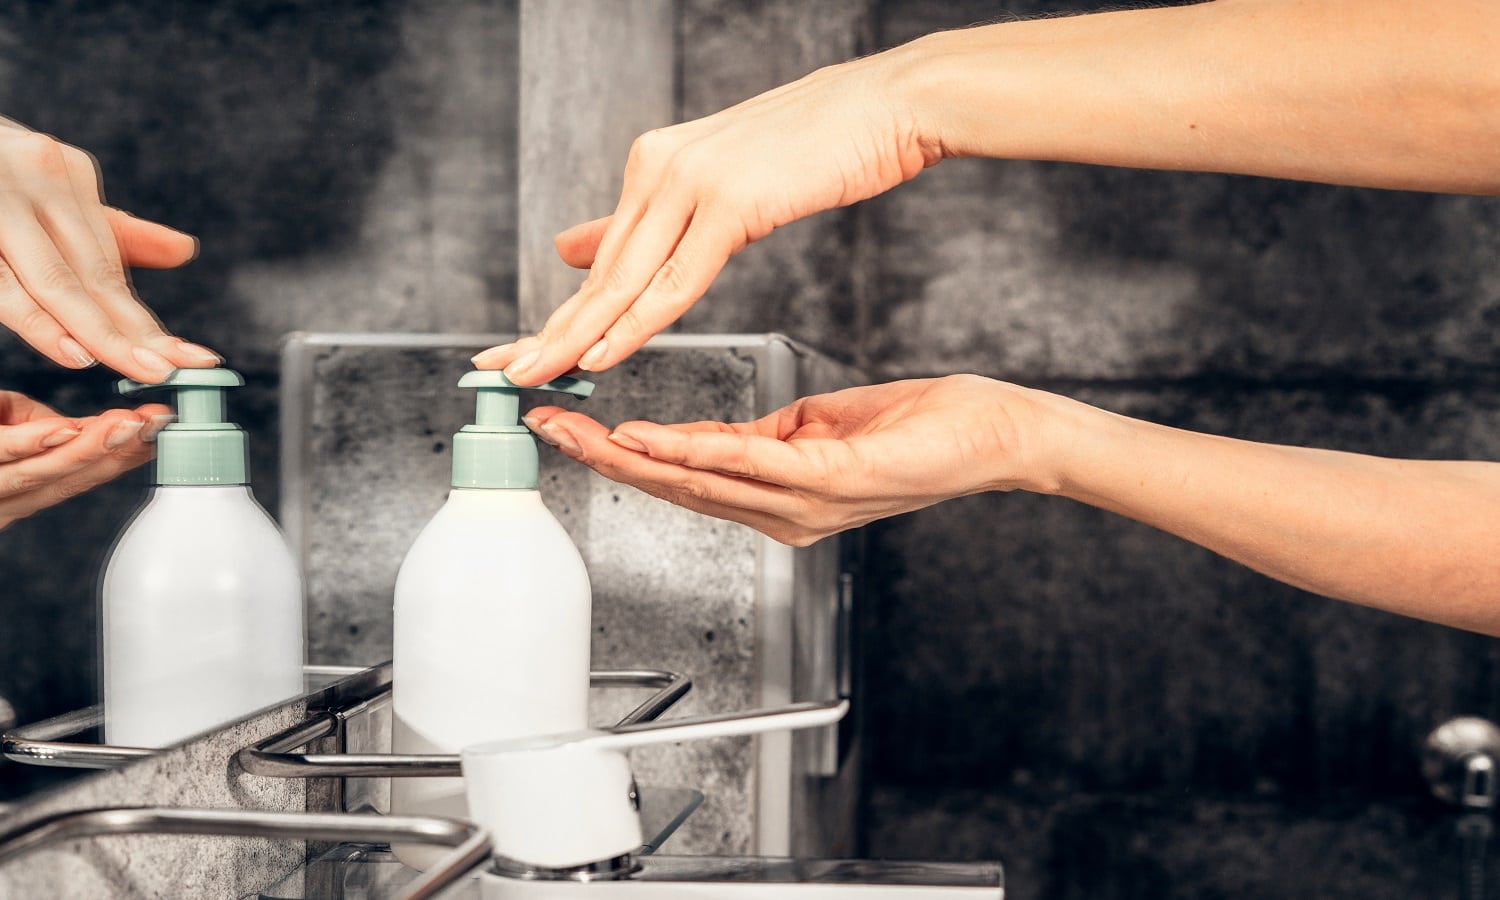 12 BEST HAND SOAPS TO